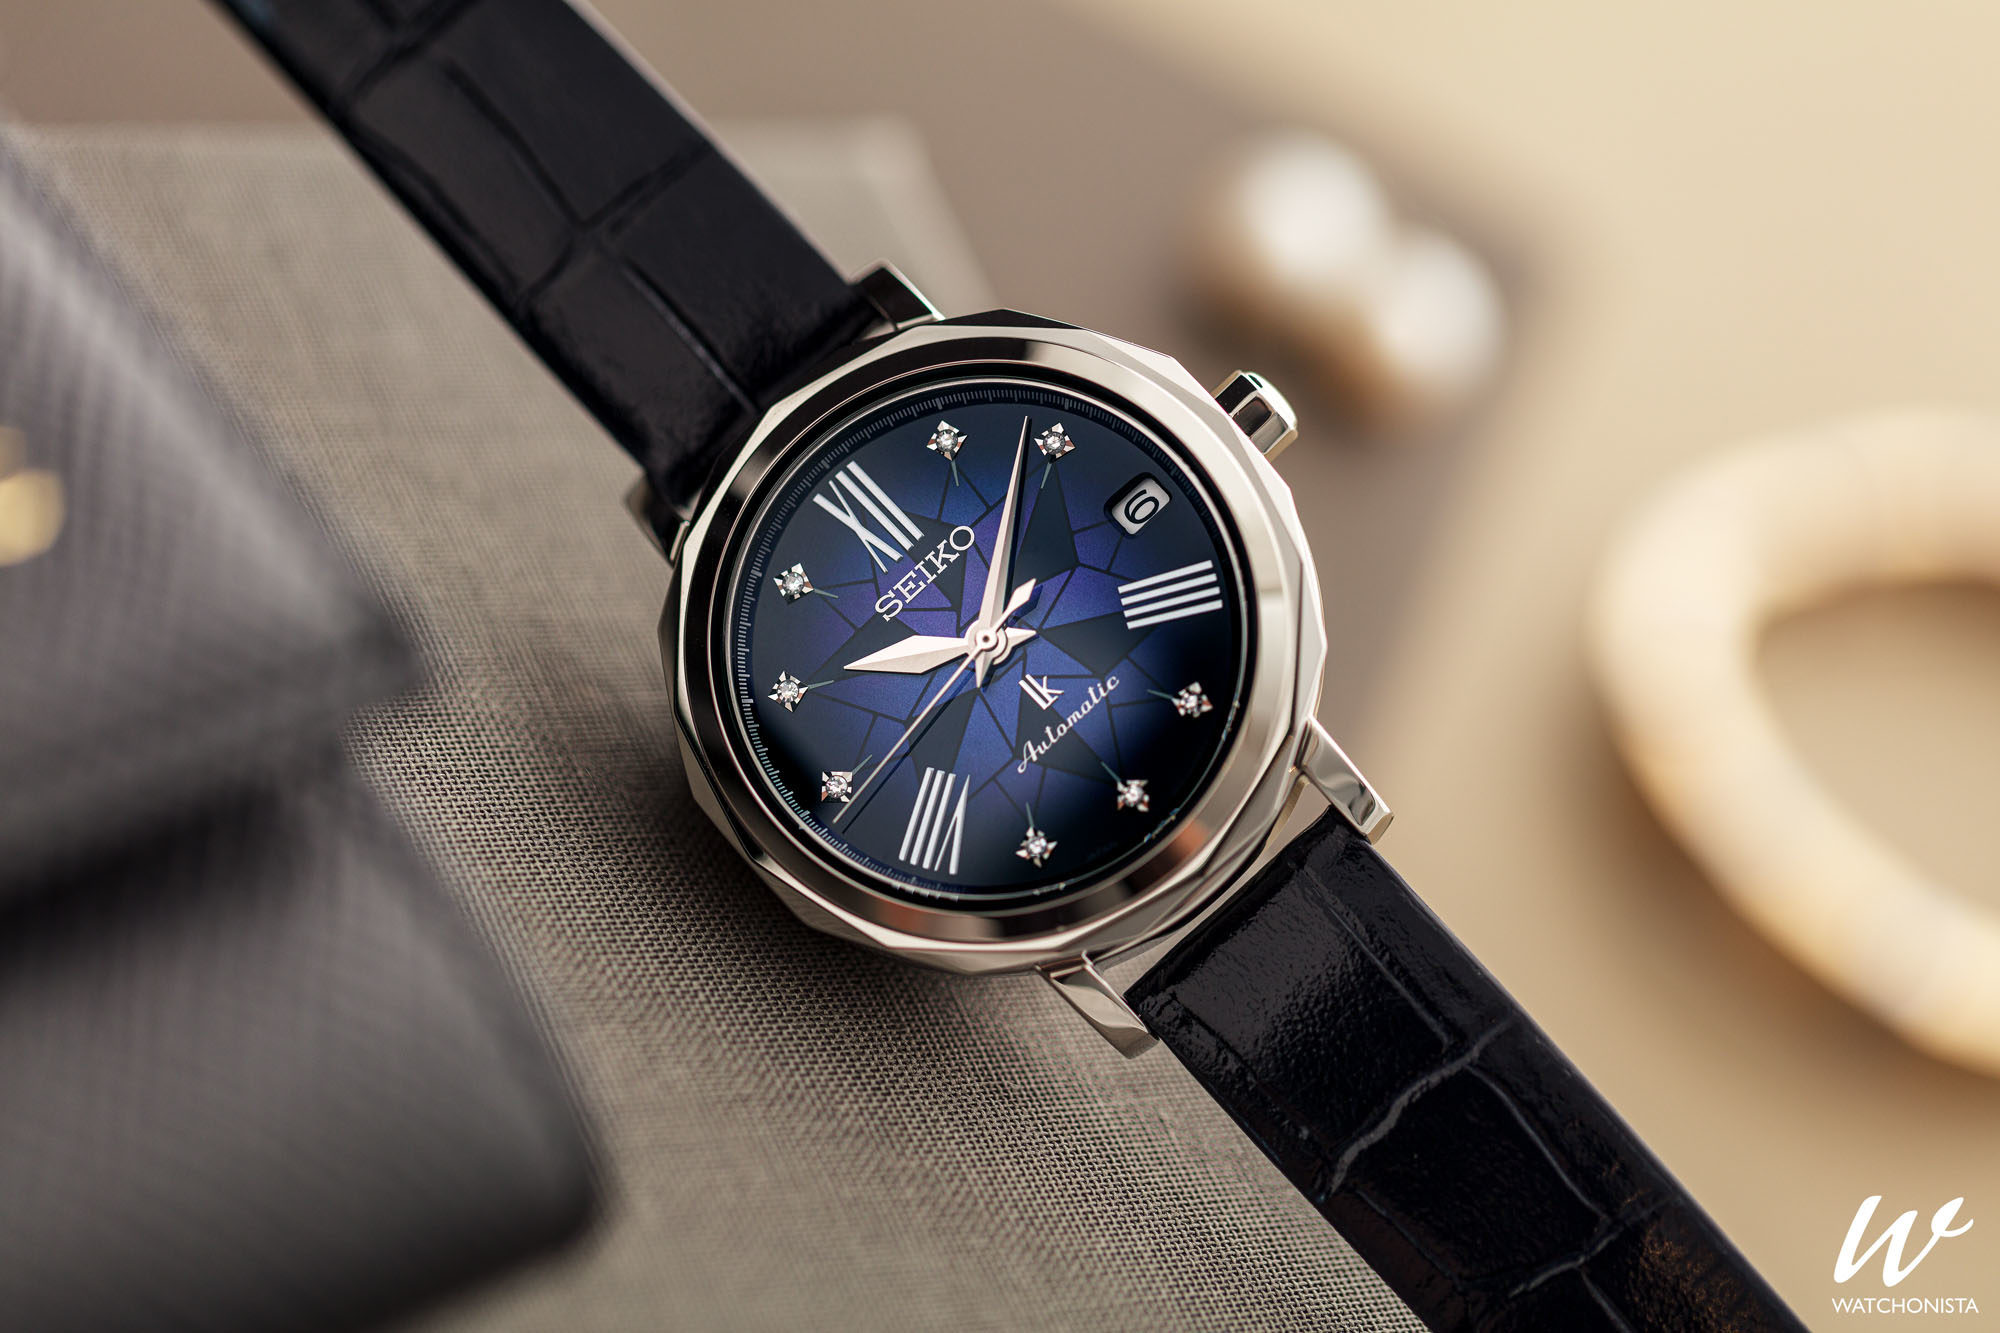 The Seiko Lukia: A New Collection Paying Tribute To The Modern Spirit